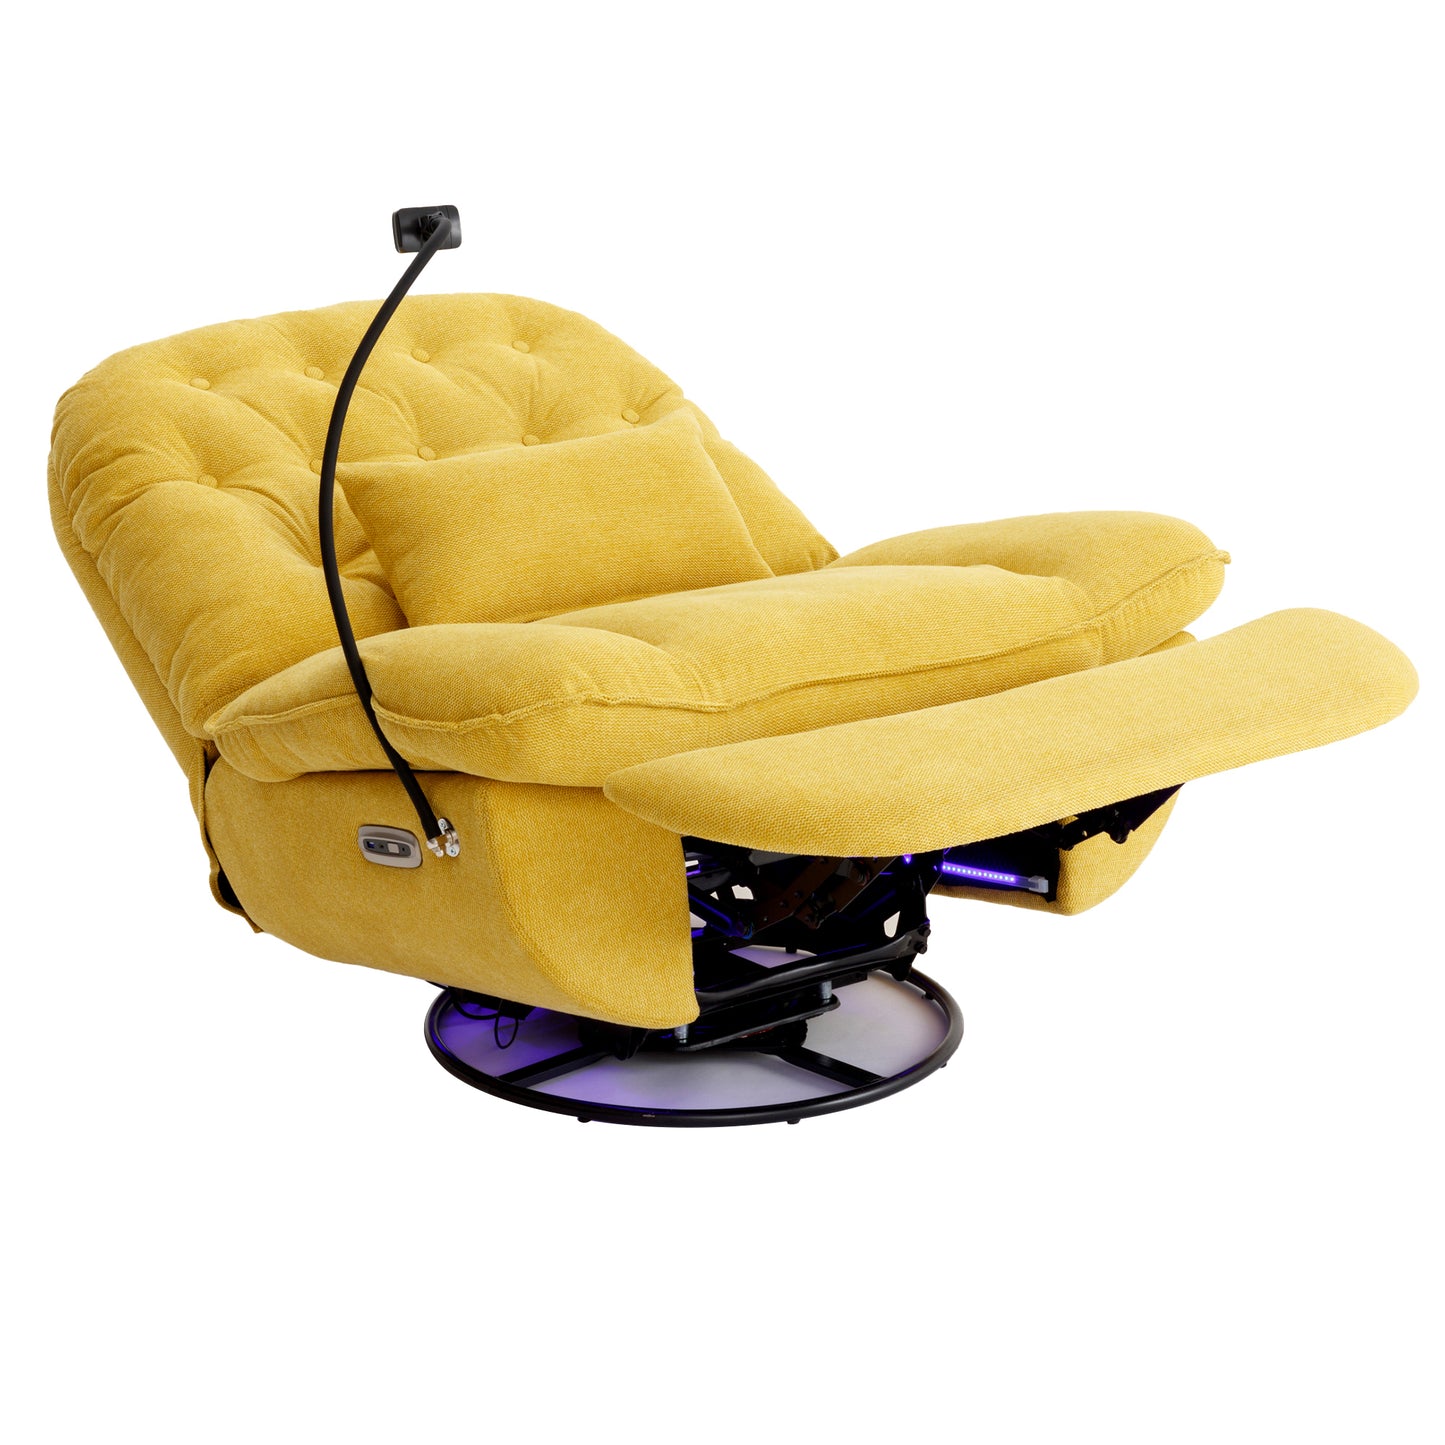 270 Degree Swivel Power Recliner with Voice Control, Bluetooth Music Player,USB Ports, Atmosphere Lamp, Hidden Arm Storage and Mobile Phone Holder for Living Room, Bedroom, Apartment, Yellow